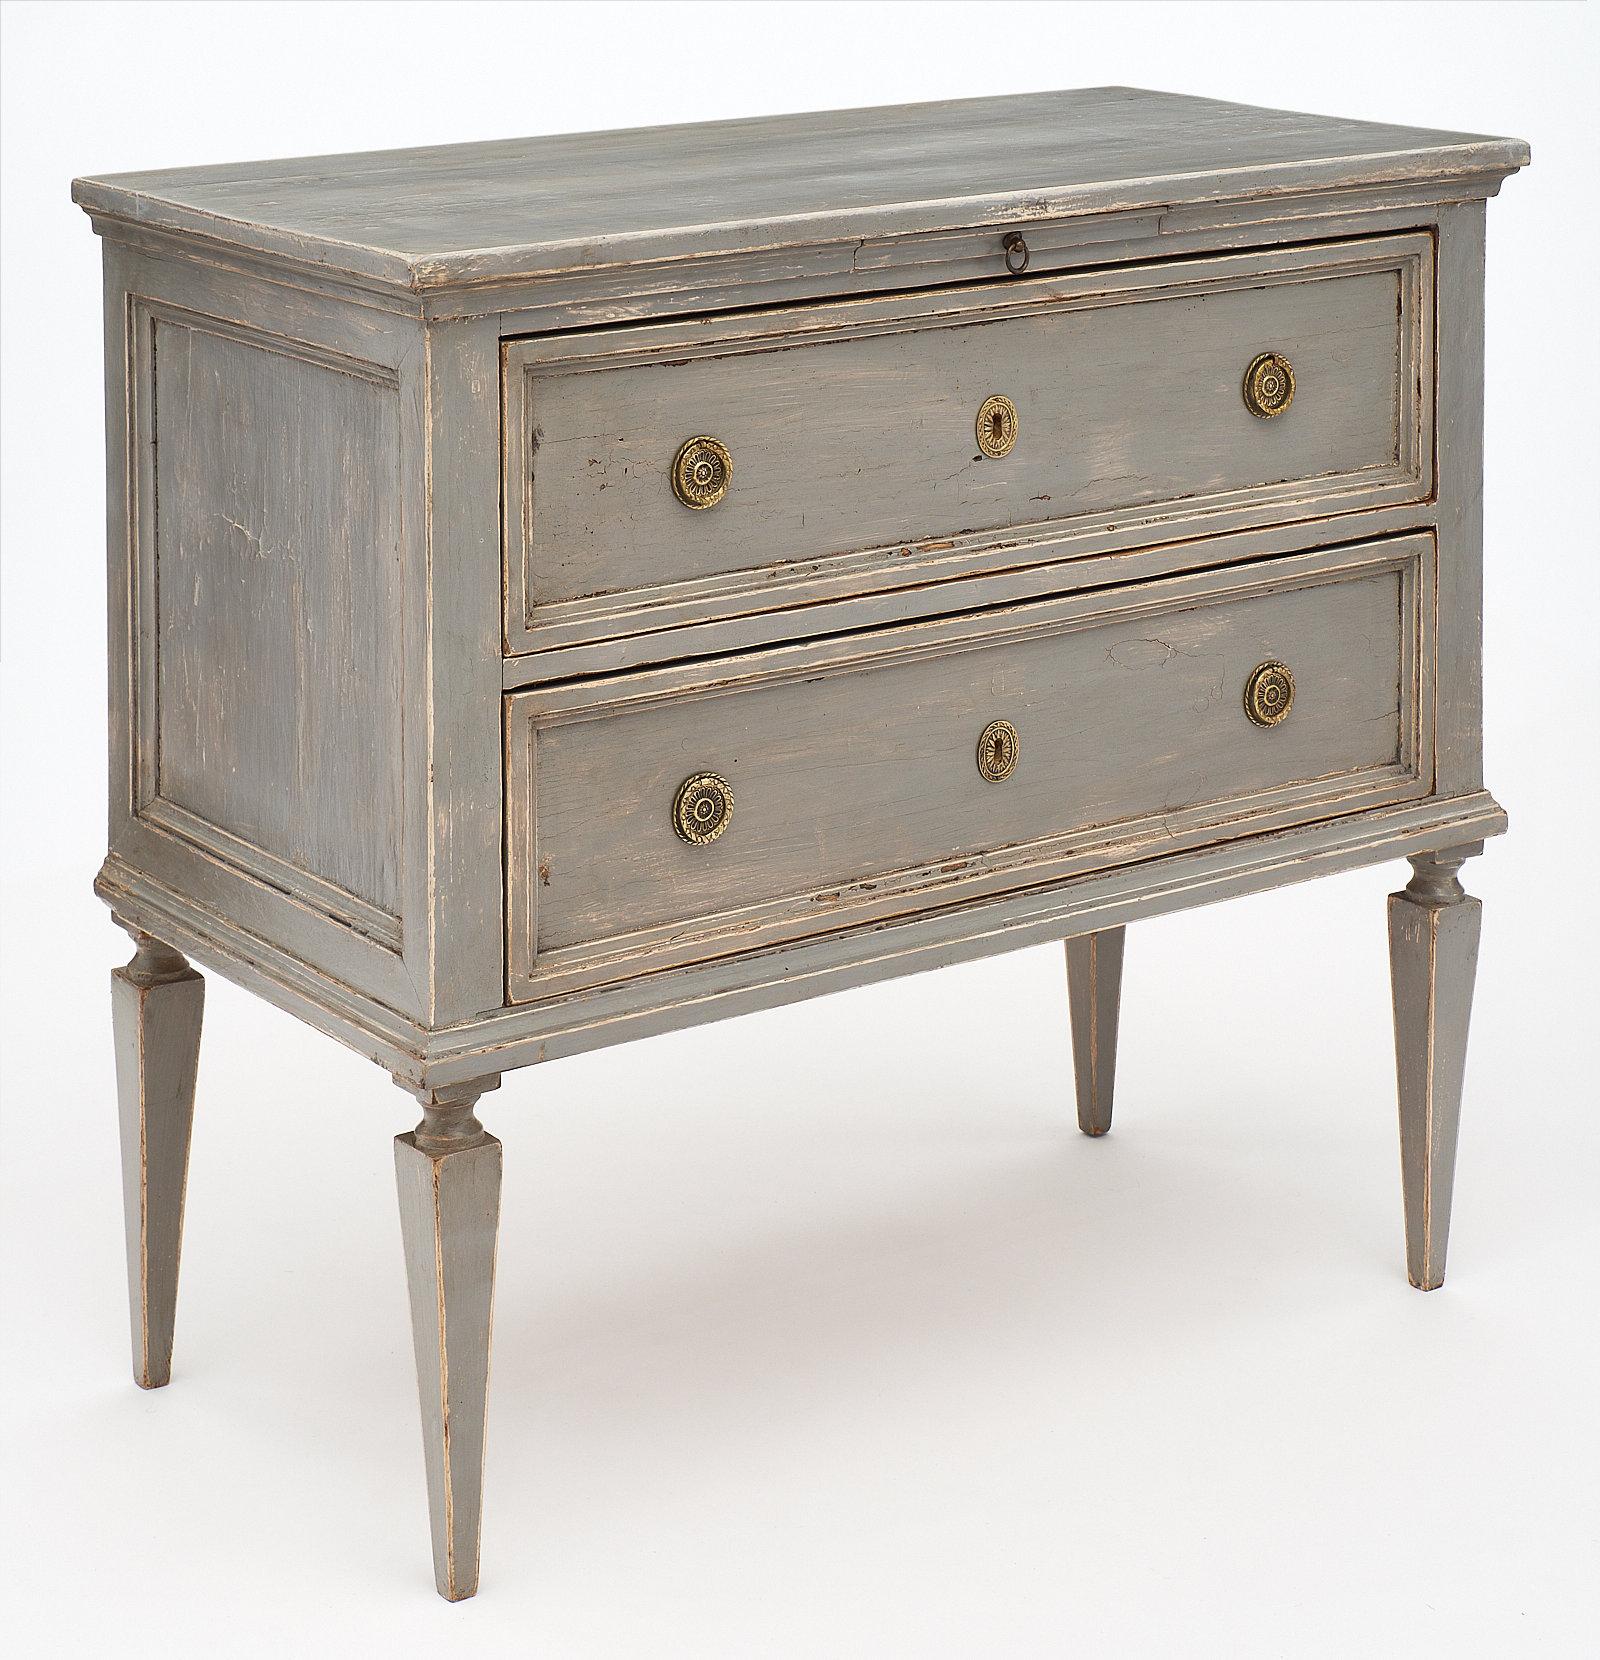 A pair of Tuscan Louis XVI style “commodes”. These Italian chests feature a blue-gray patina with finely cast bronze hardware. We loved the construction and the flawless lines. They are made of solid fir and each have a pull-out leaf above the two